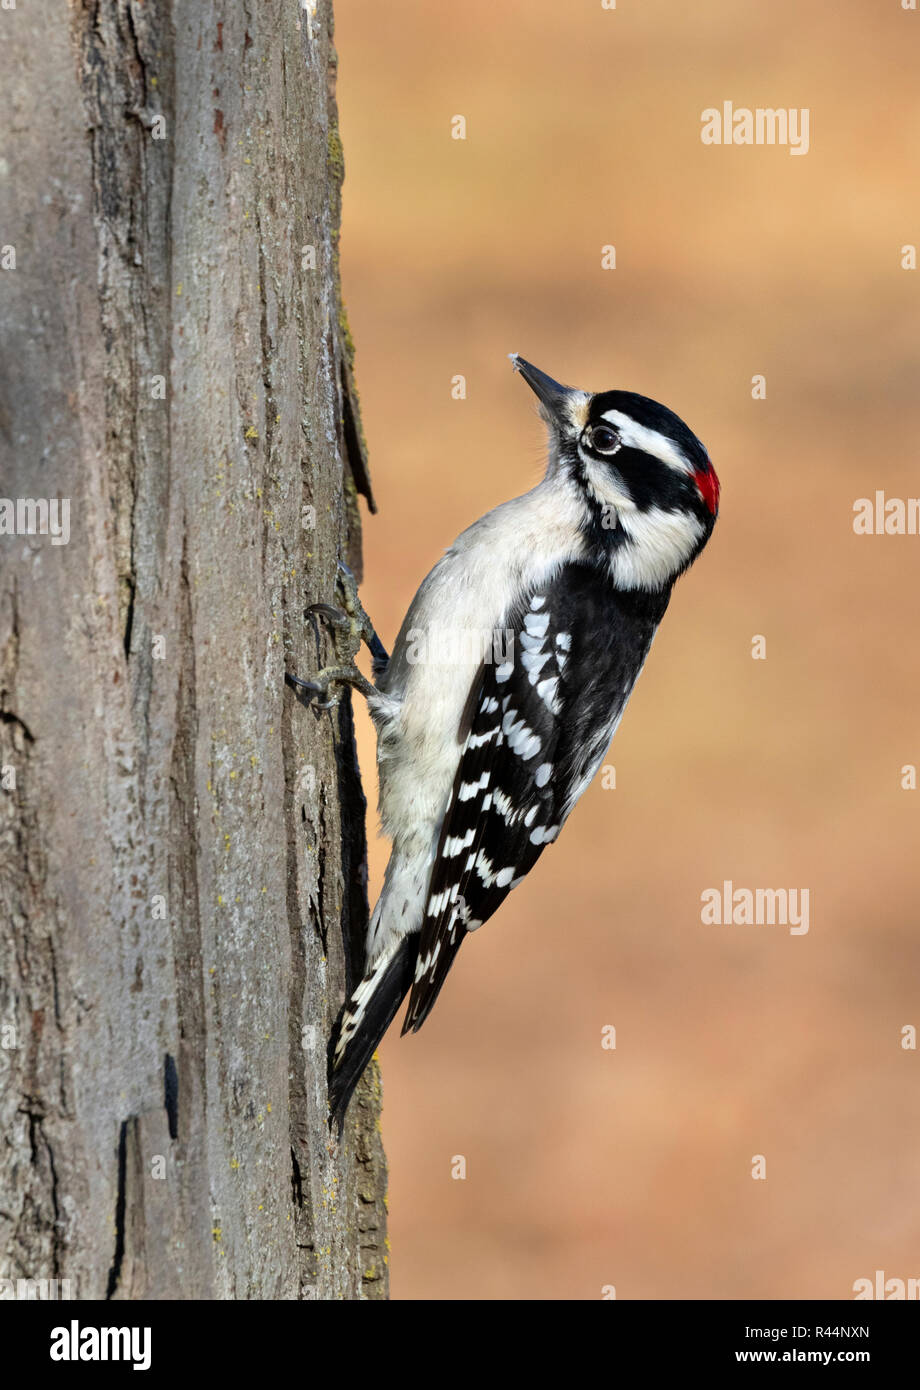 Downy woodpecker (Dryobates pubescens) male feeding on a tree trunk on the background of fallen leaves, Iowa, USA Stock Photo